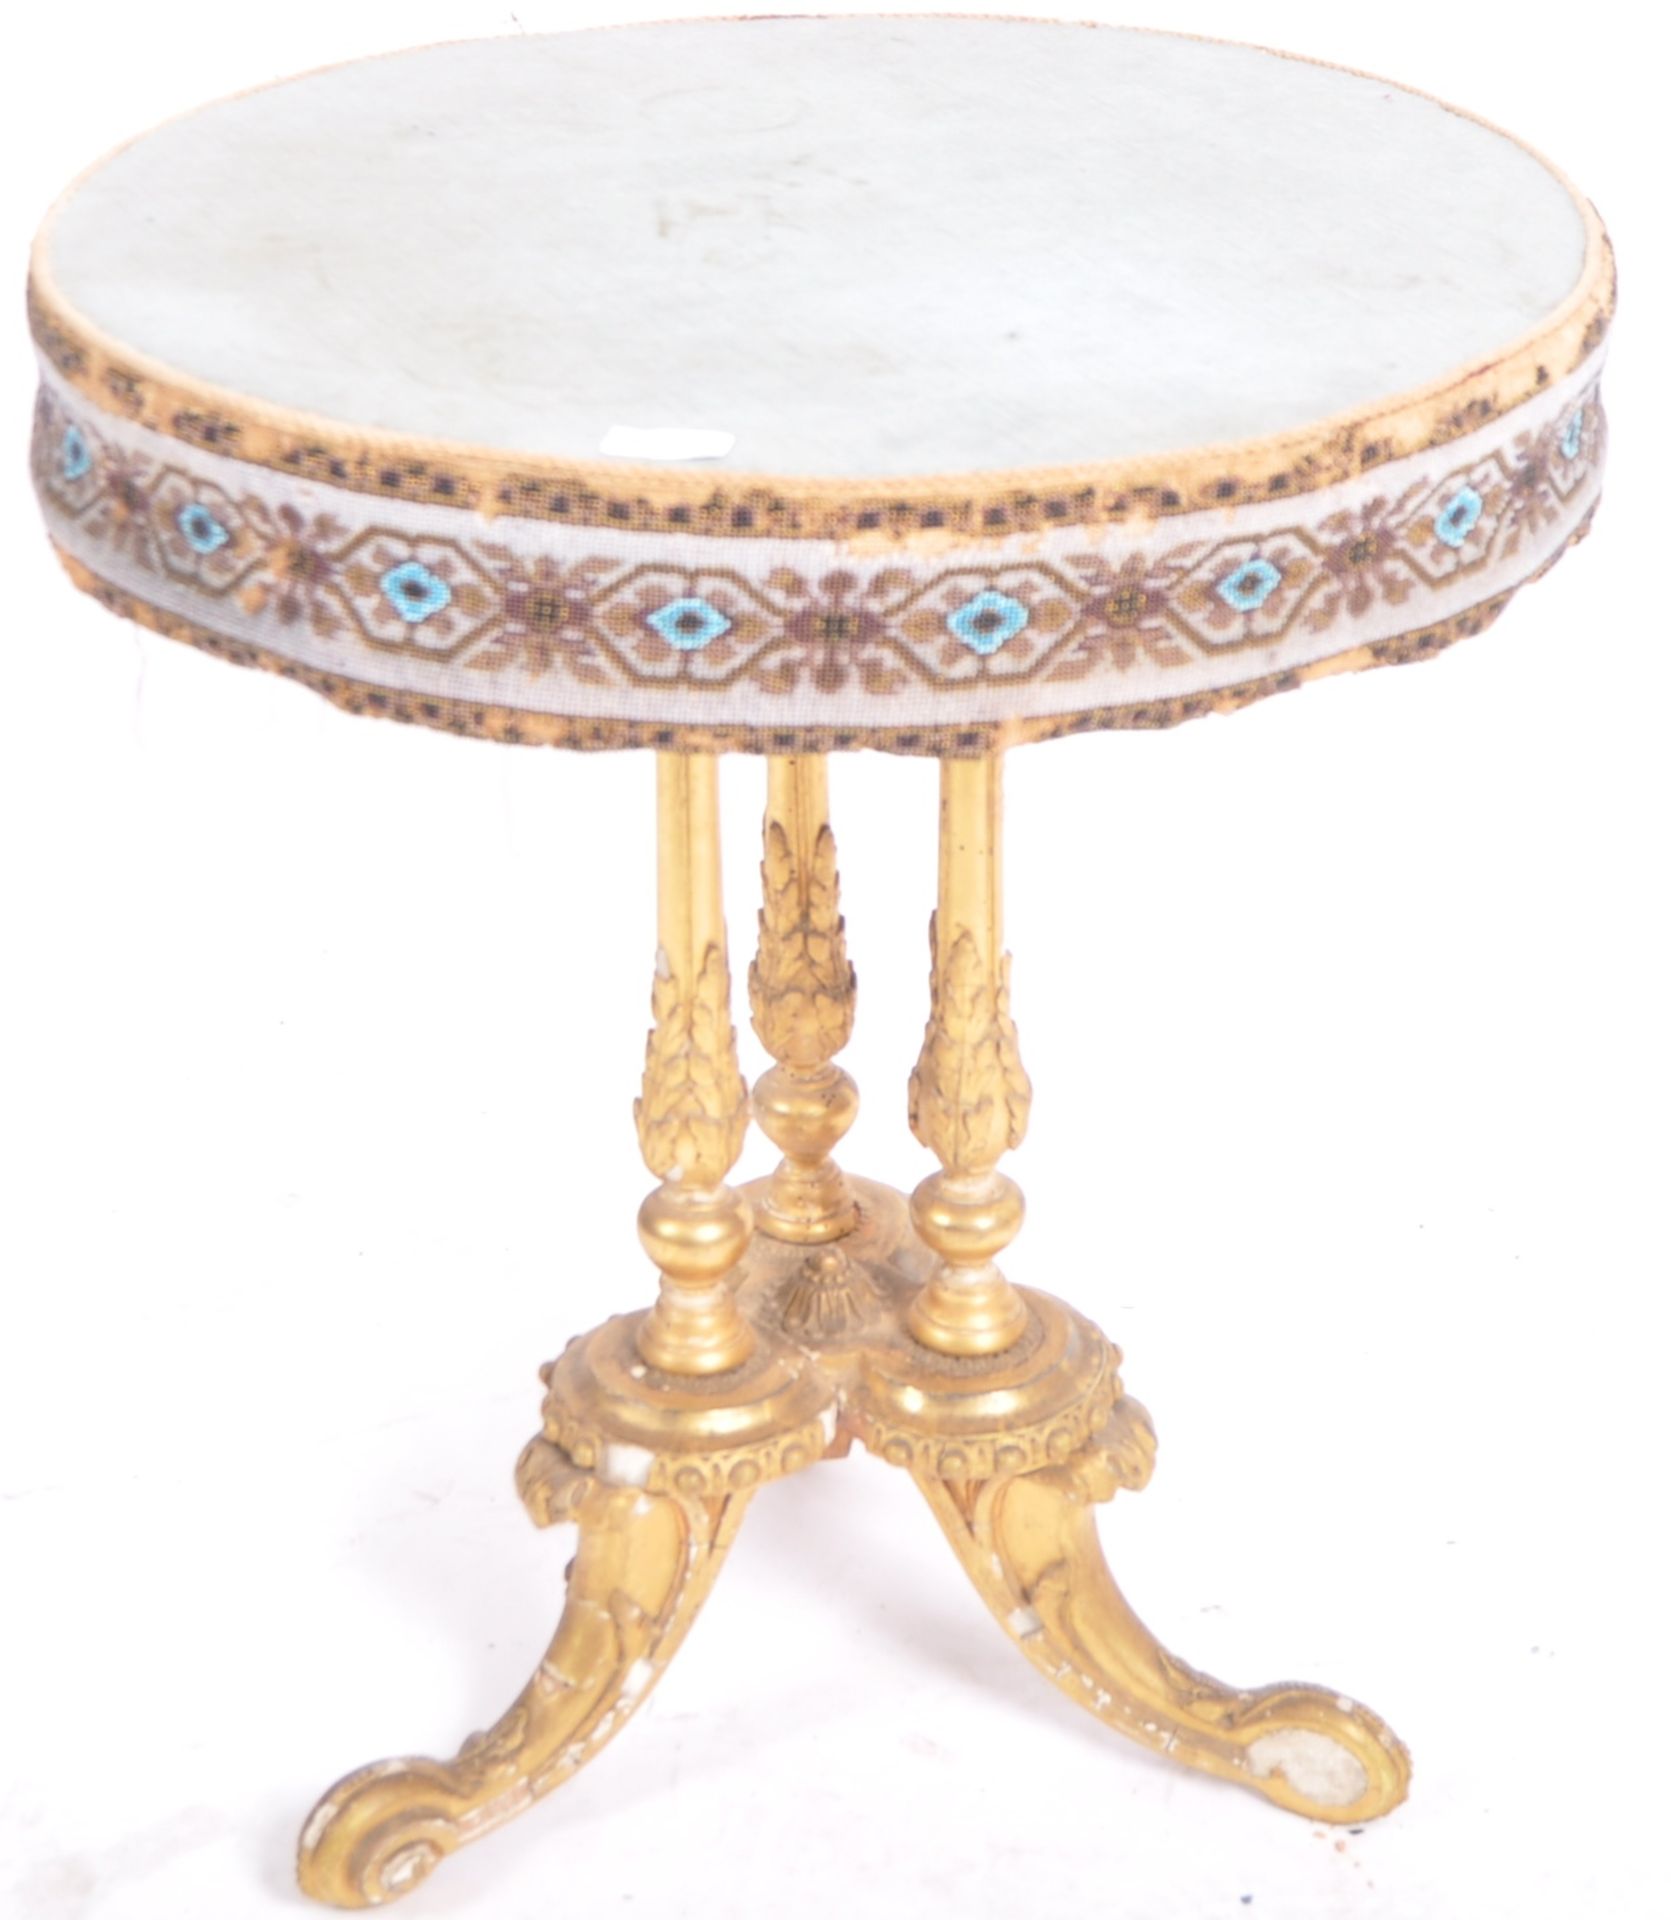 19TH CENTURY VICTORIAN GILTWOOD GYPSY TABLE - Image 2 of 8